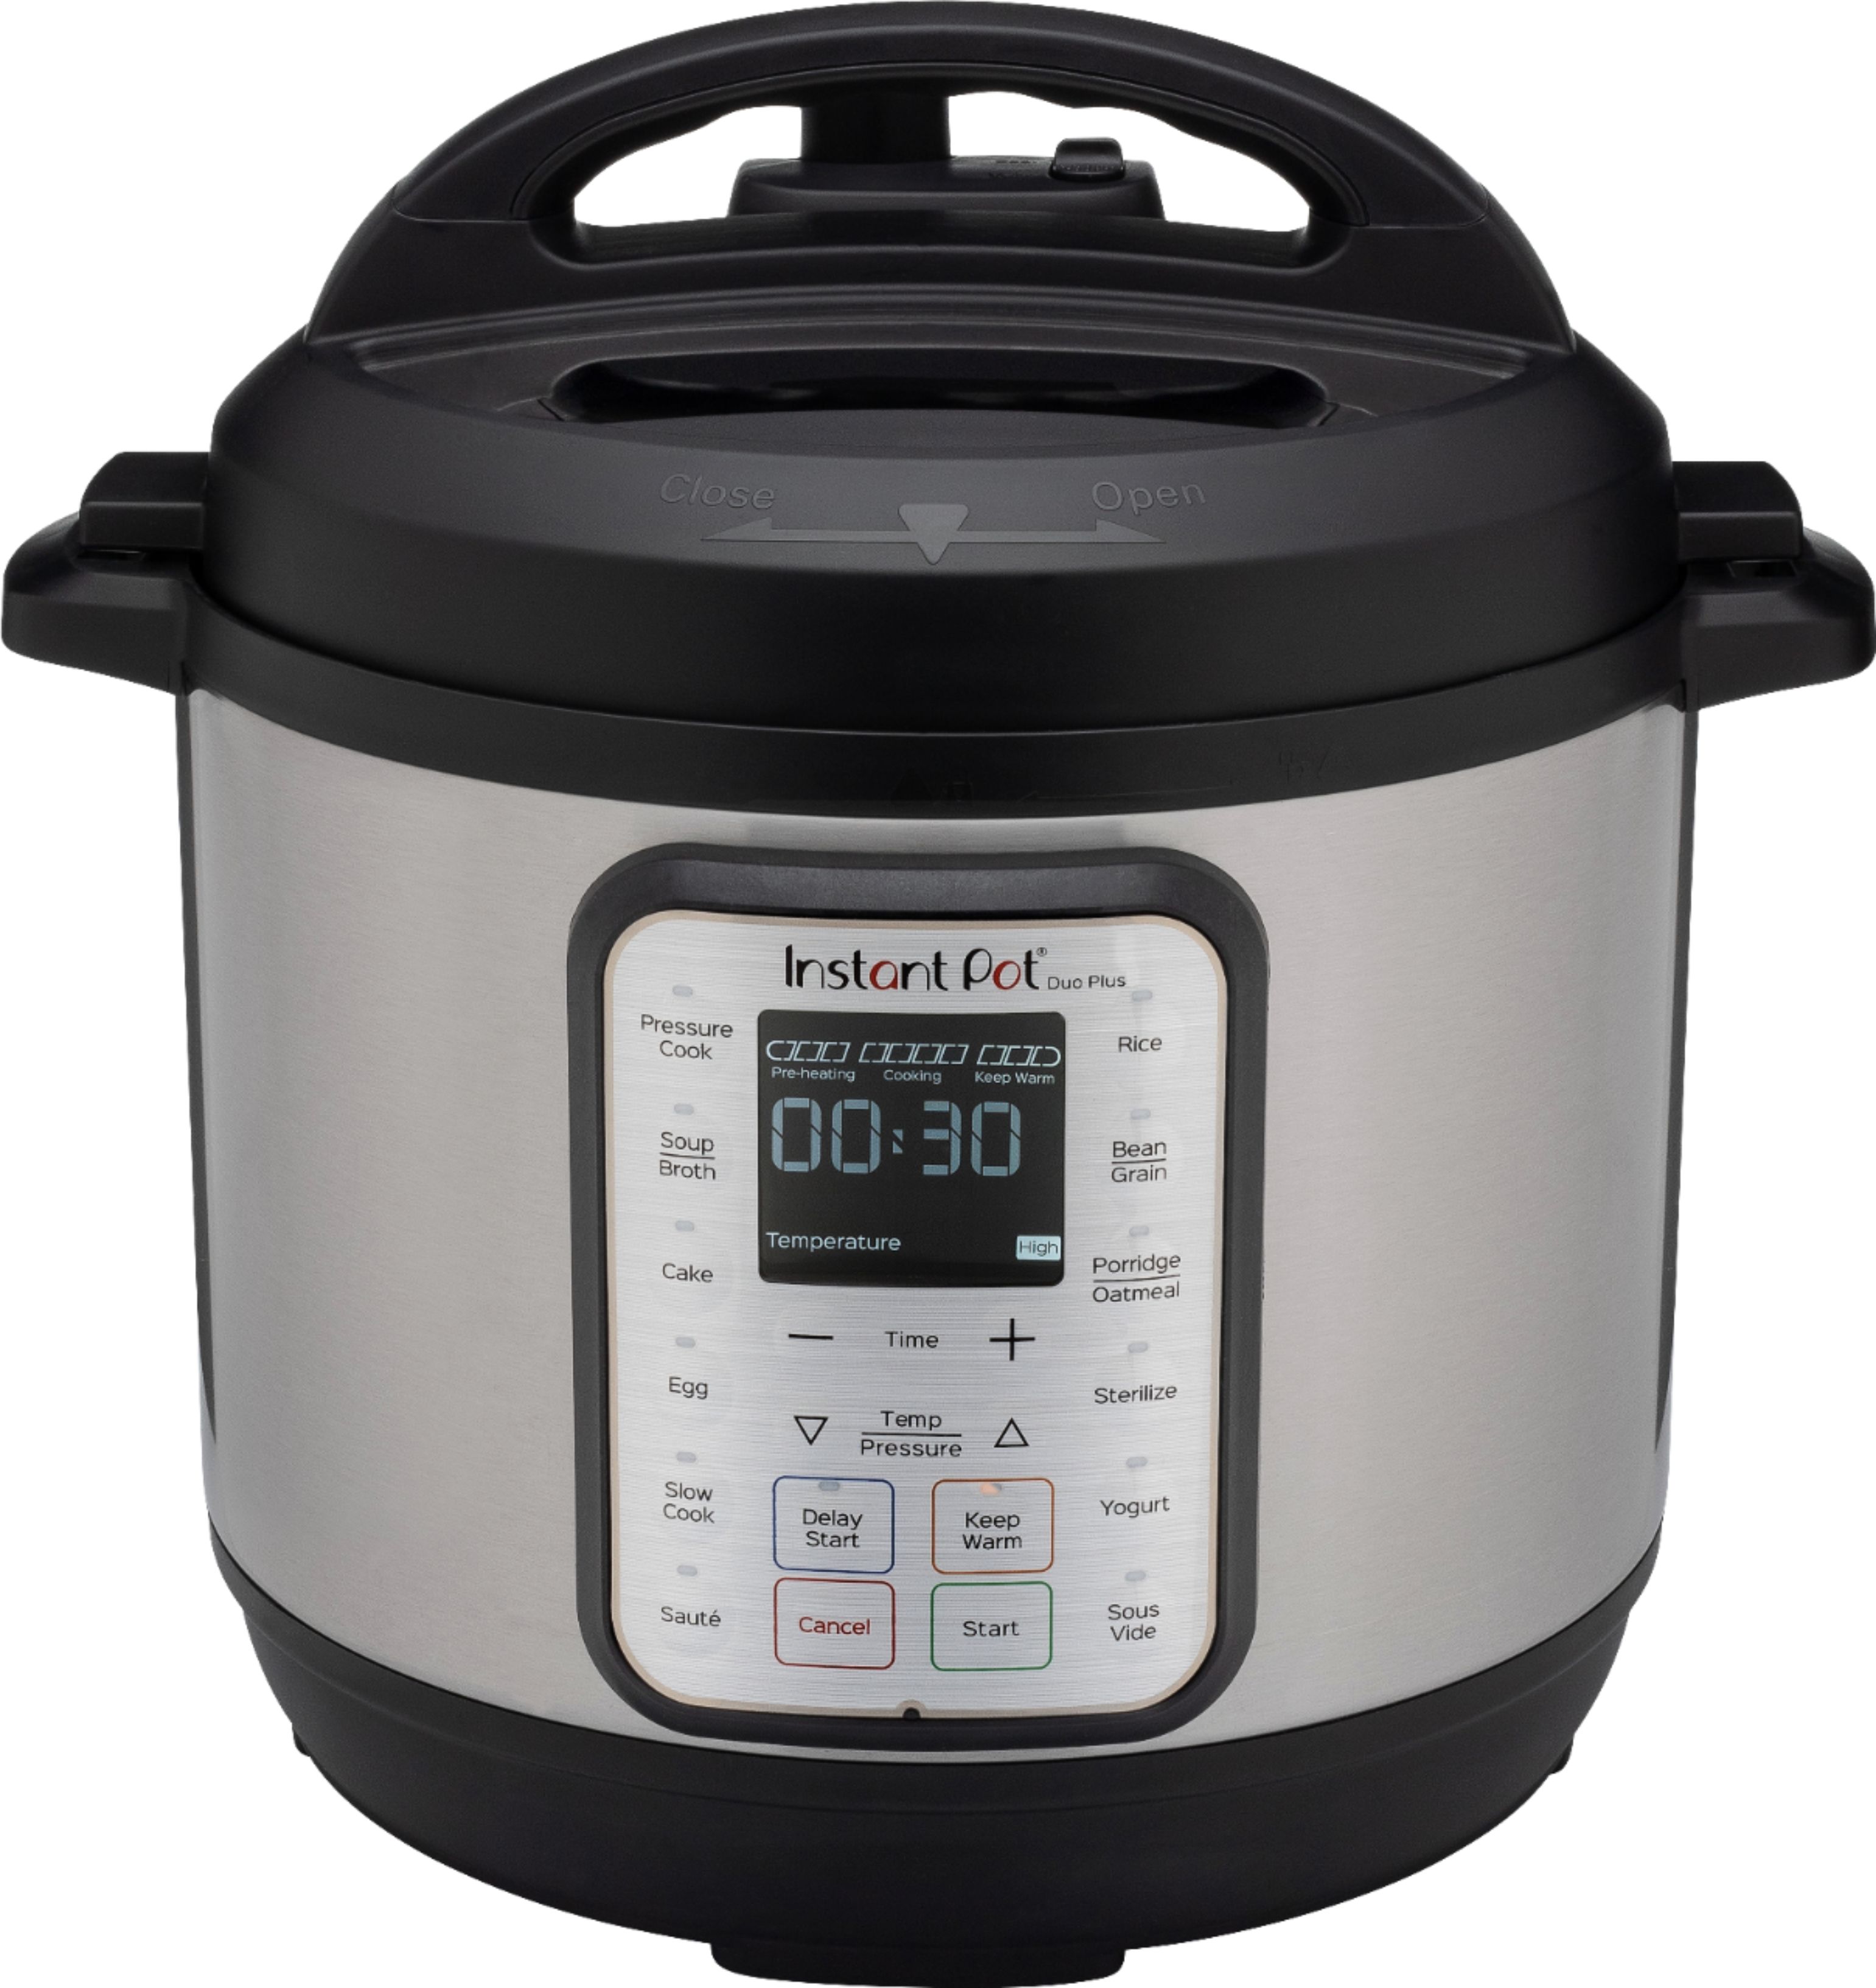 Questions and Answers: Instant Pot 6 Quart Duo Plus 9-in-1 Electric ...